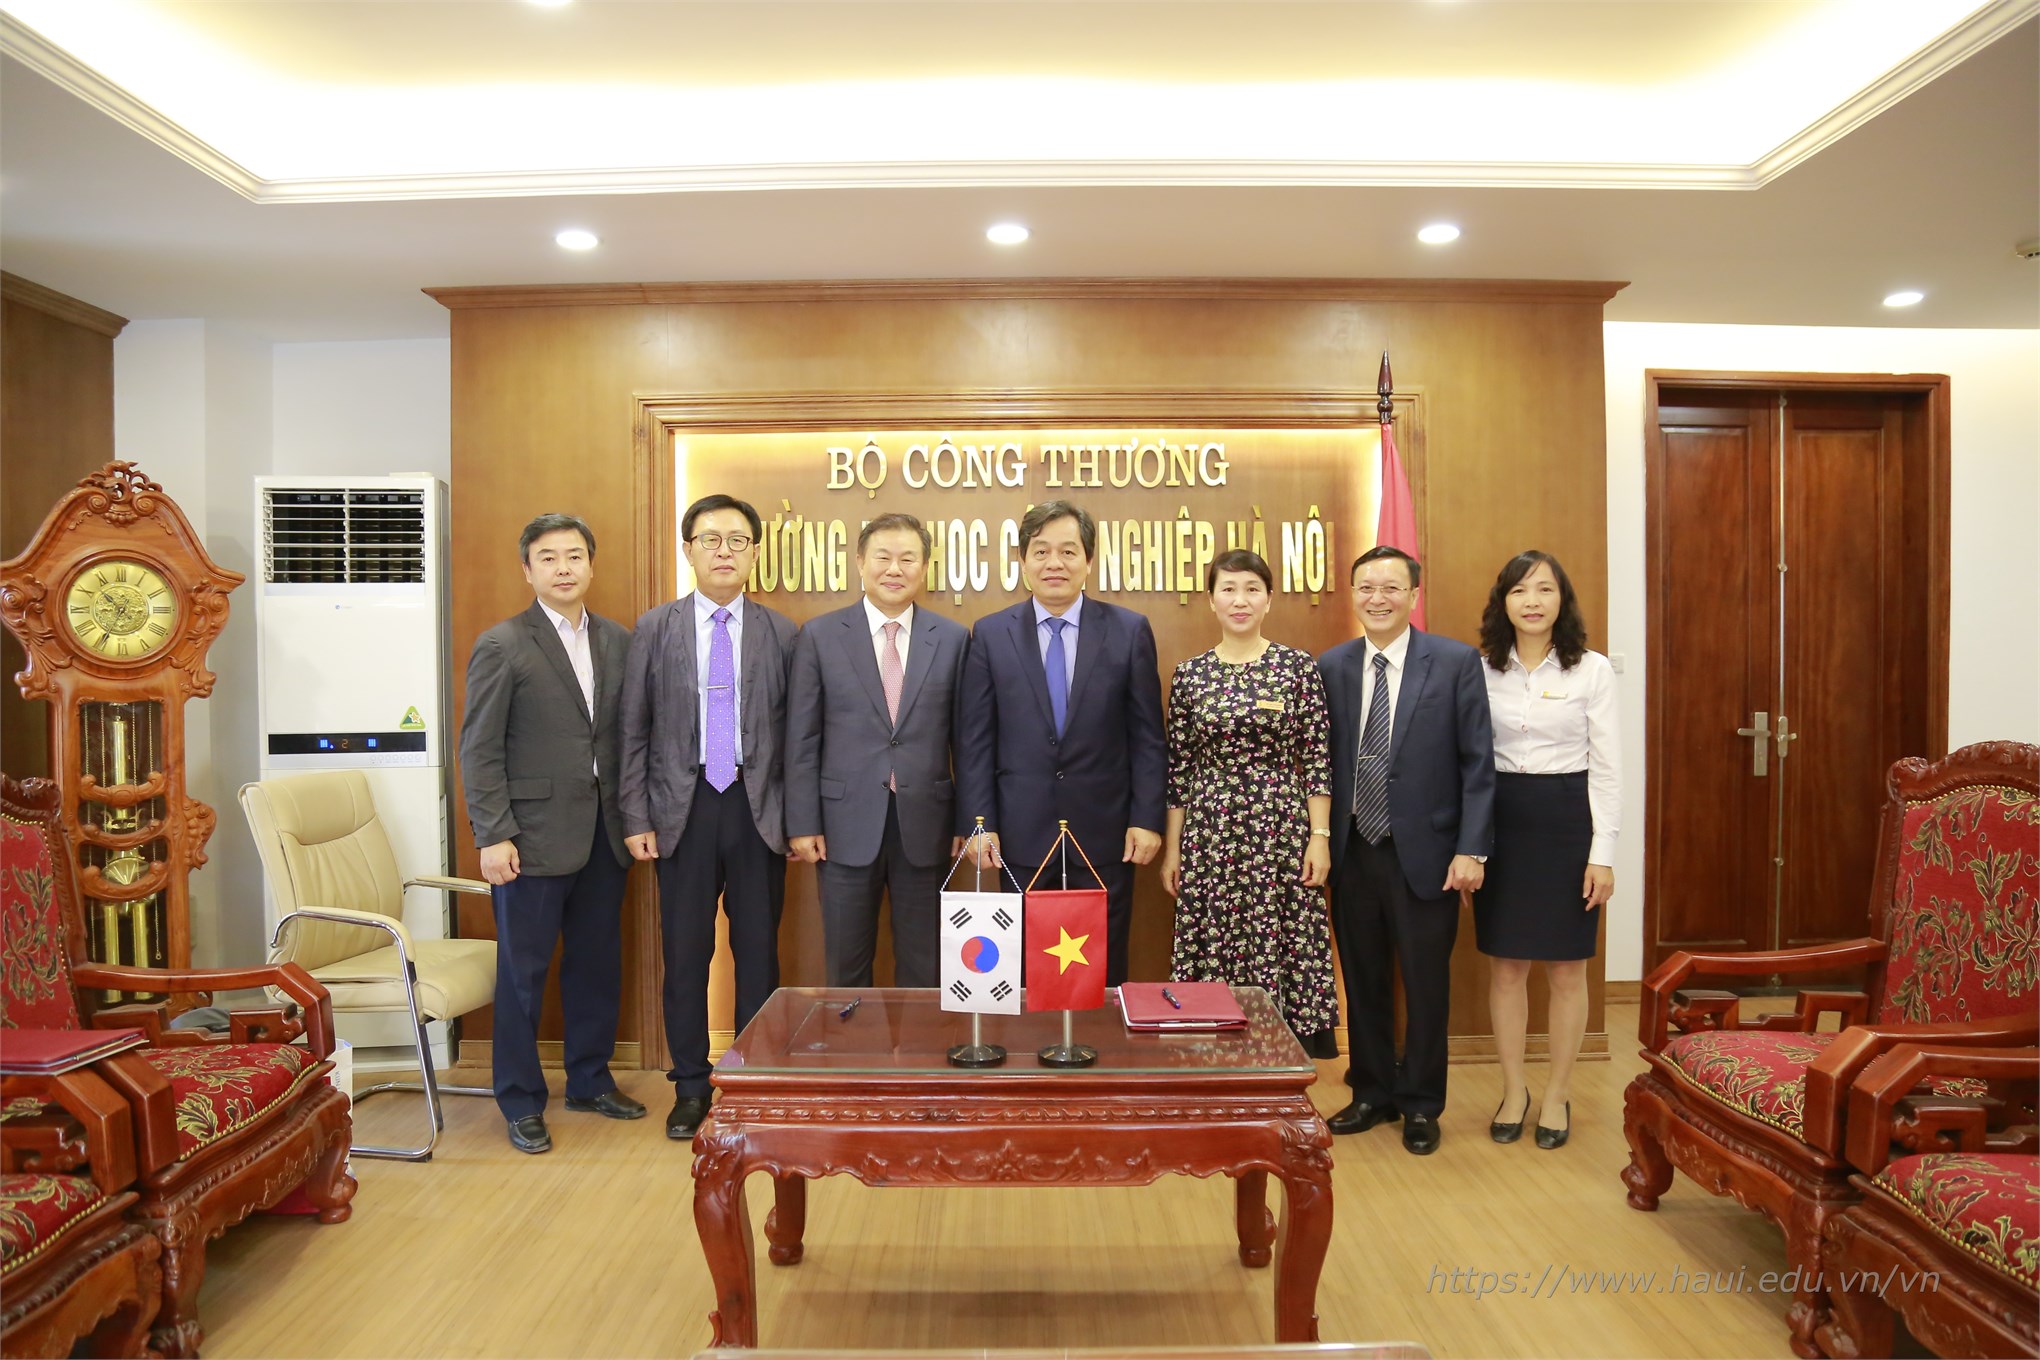 Hanoi University of Industry signed a cooperation agreement with Kunjang College - Korea